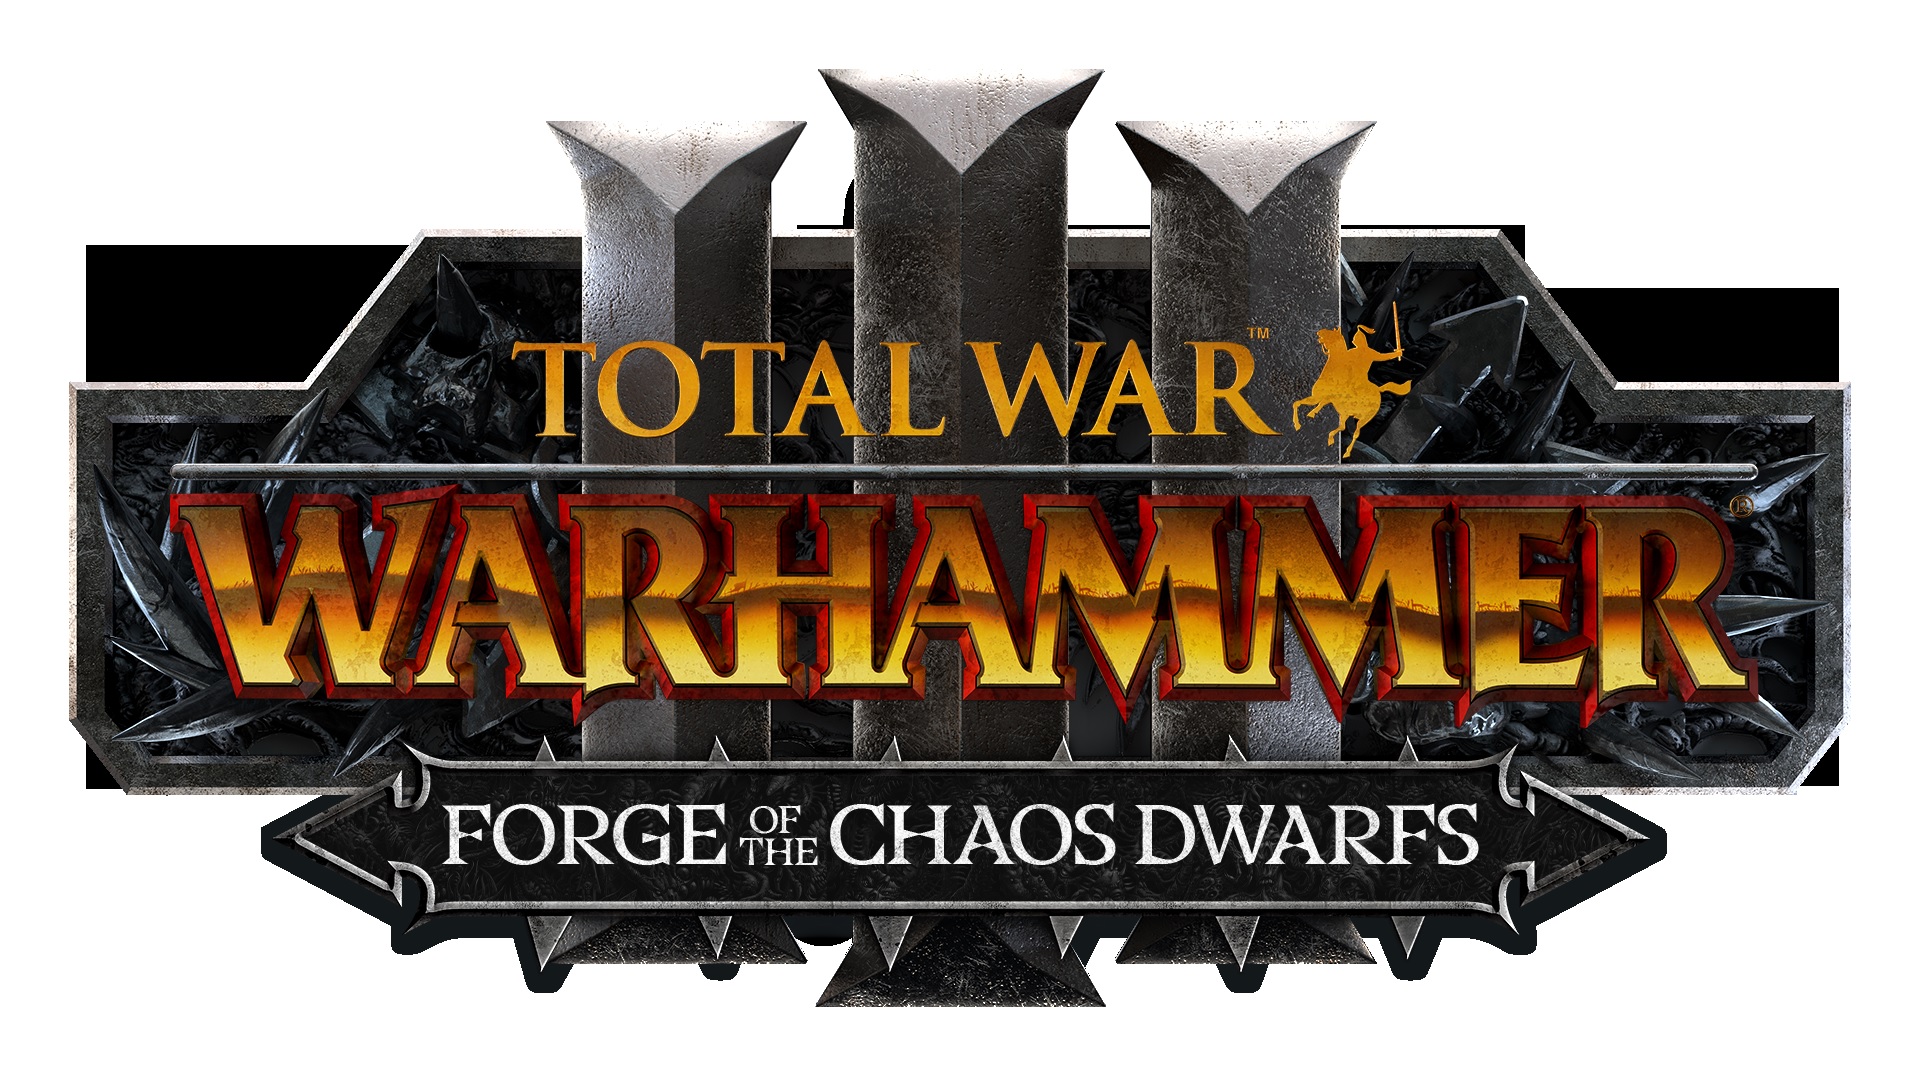 TOTAL-WAR-WARHAMMER-III–THE-FORGE-OF-THE-CHAOS-DWARFS-IS-OUT-NOW-COVER